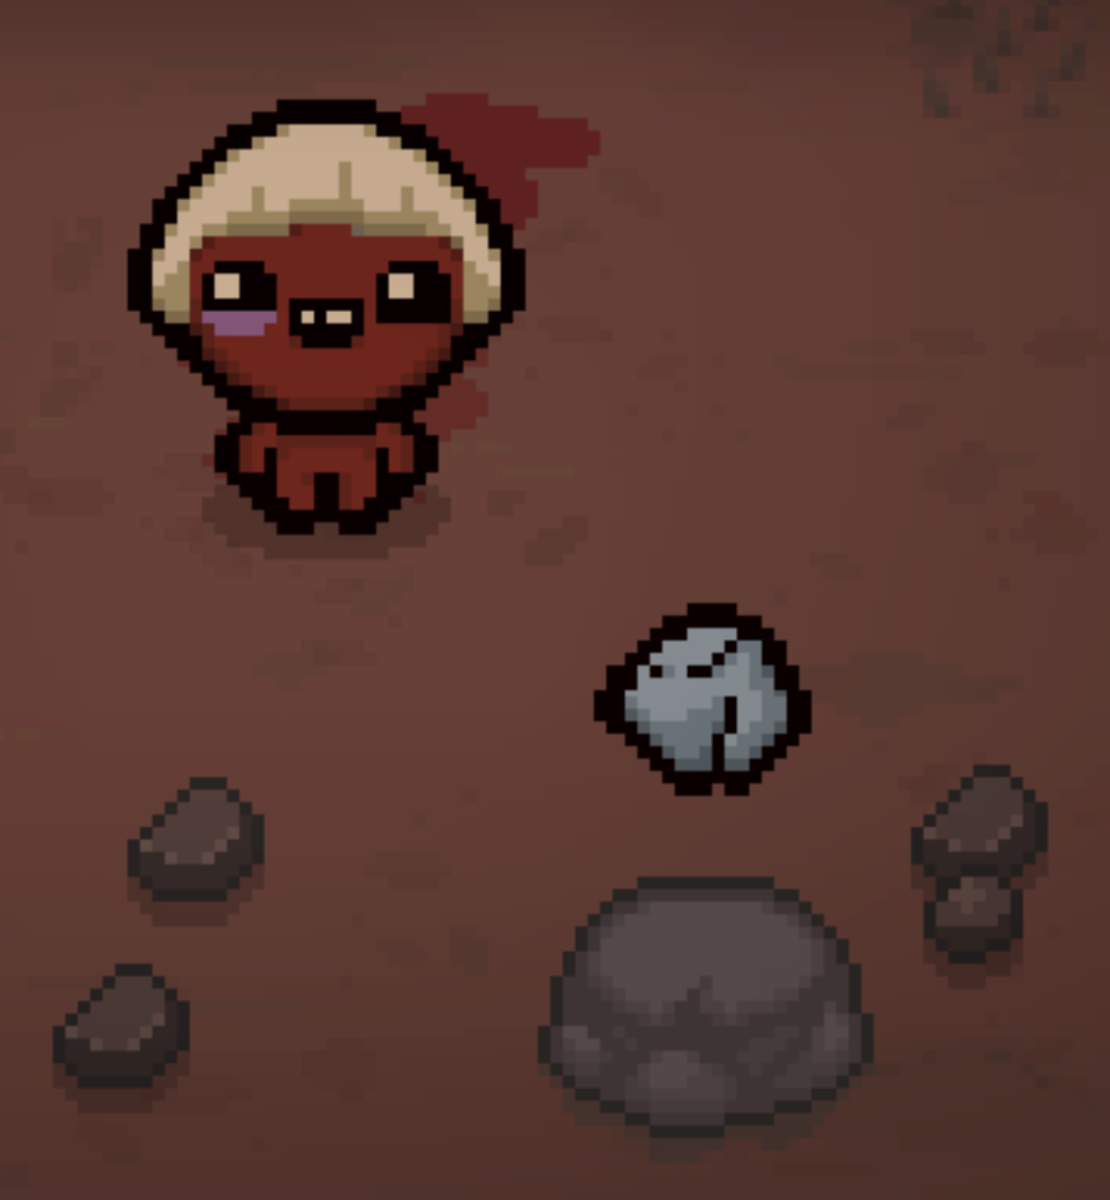 I got The Small Rock item after blowing up a tinted rock with a bomb.